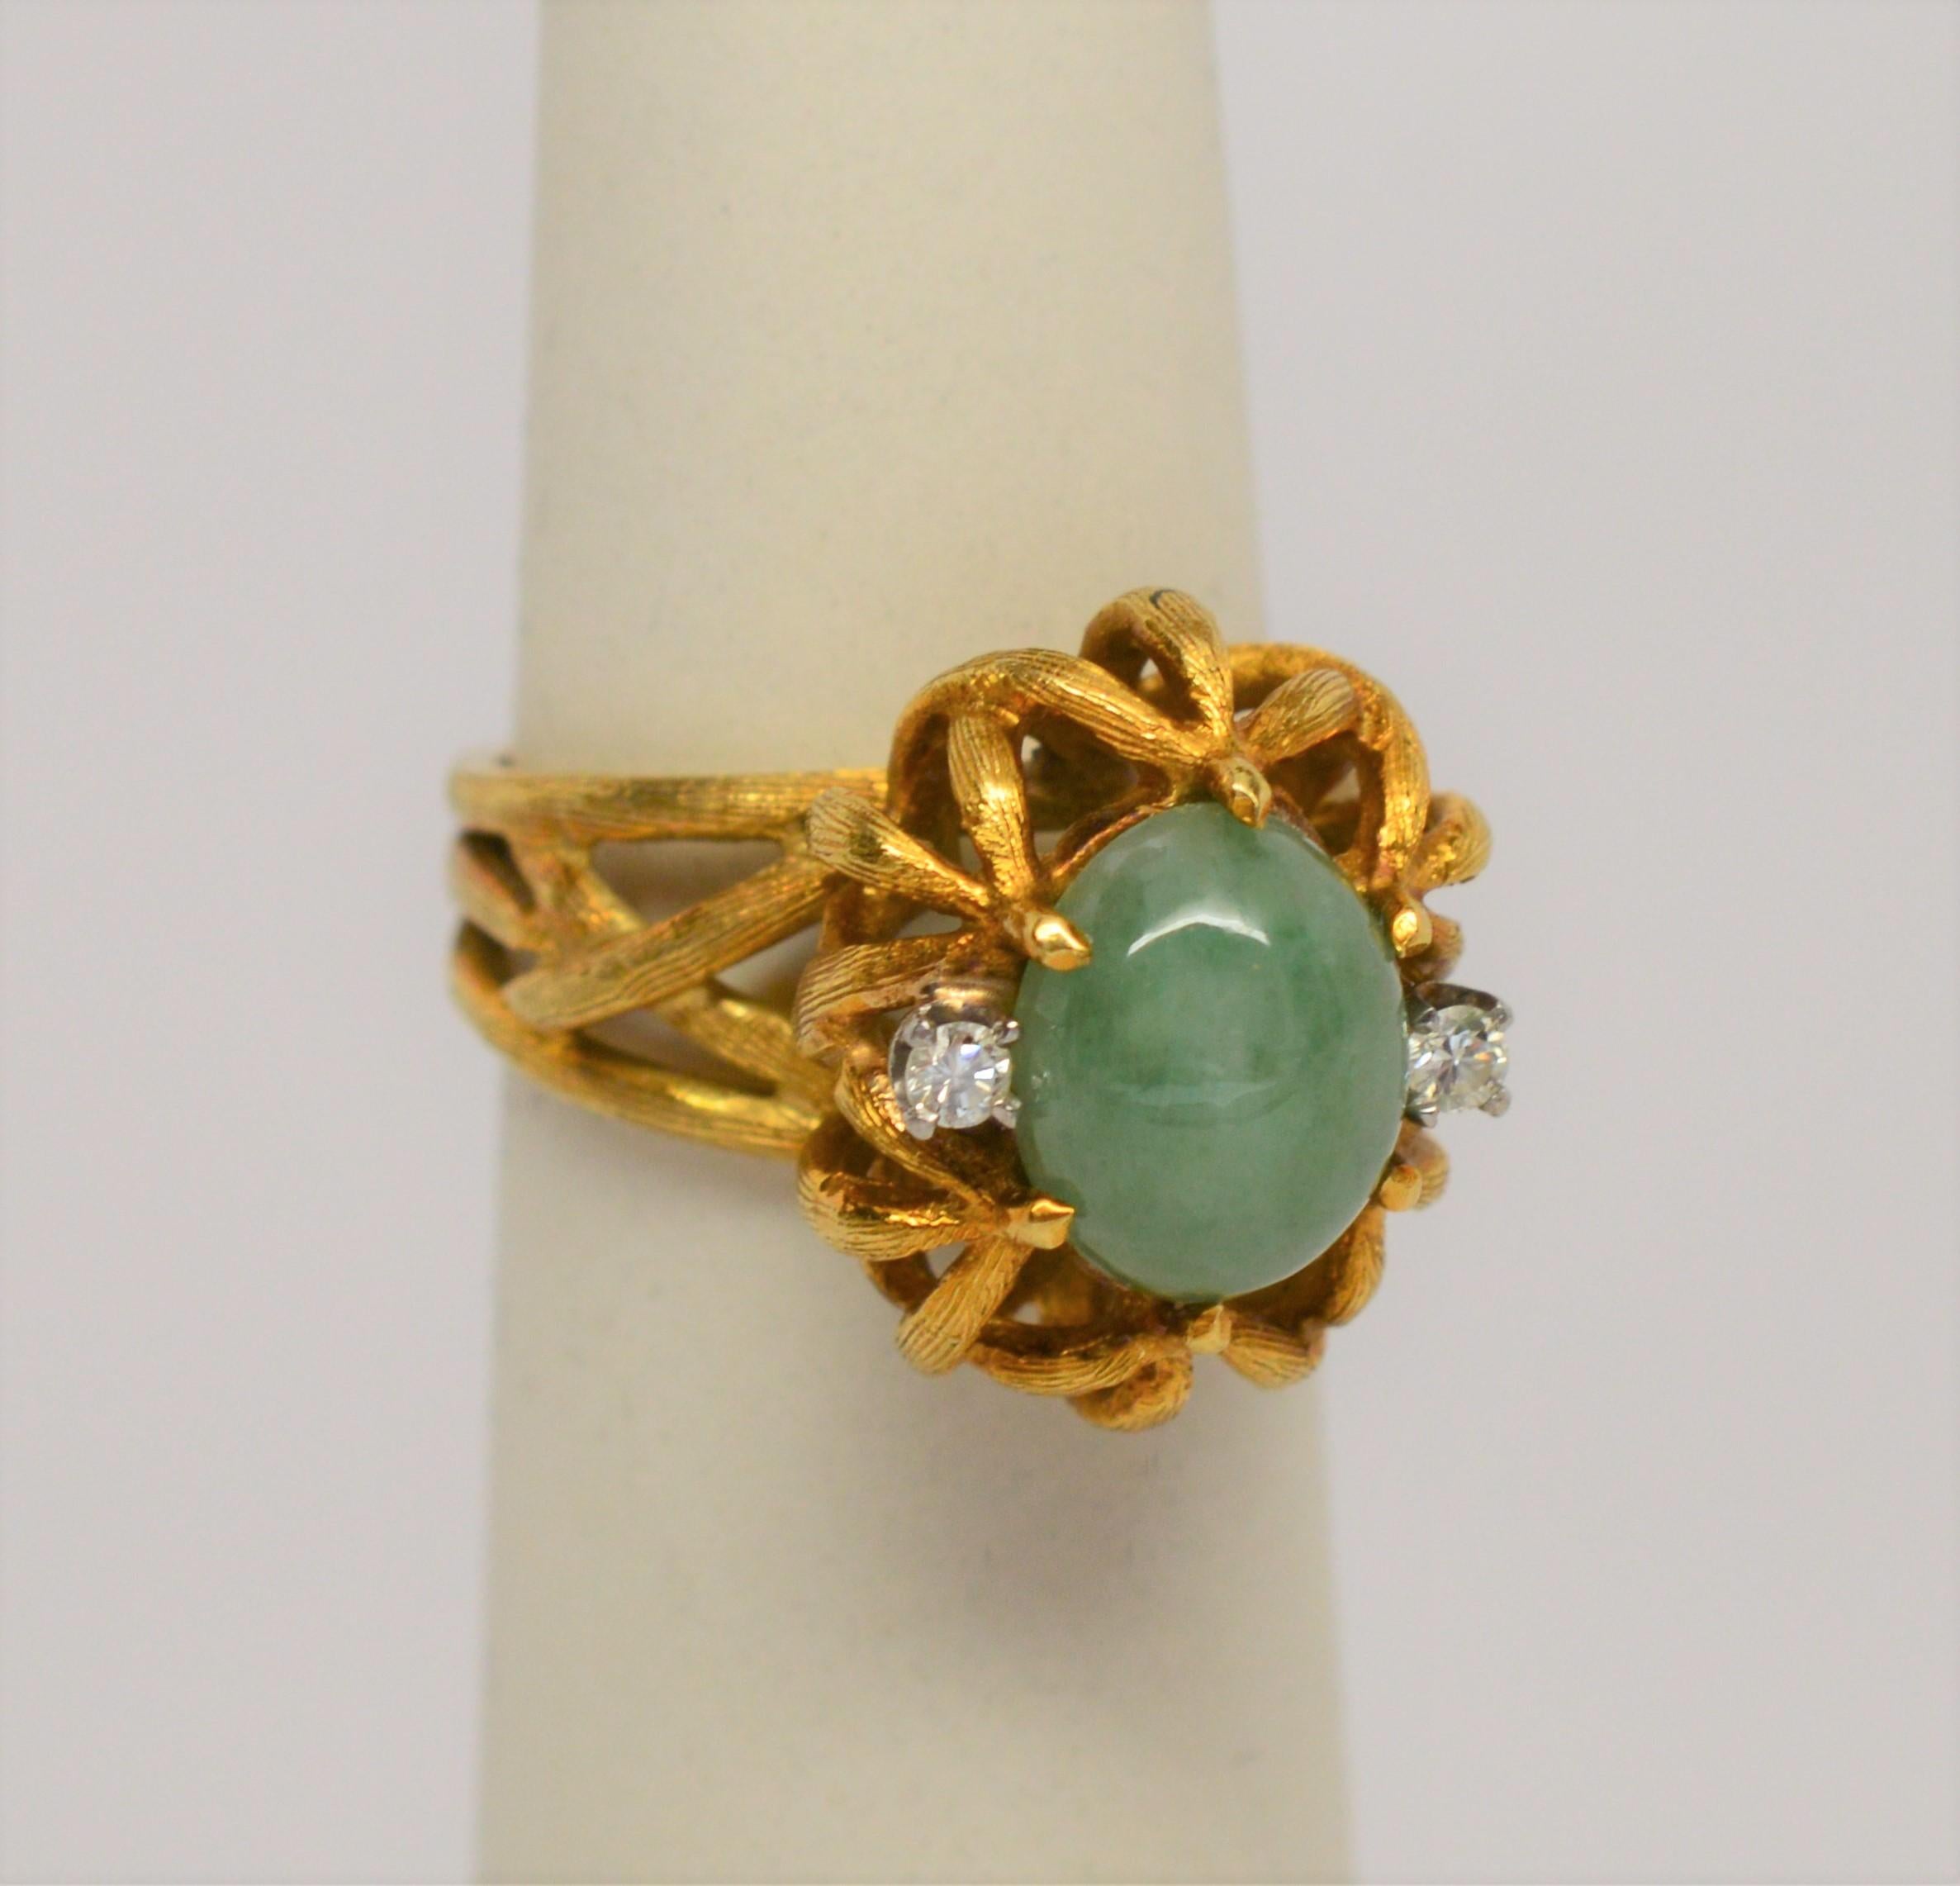 A fine, soft green, mottled semi-transparent Imperial Jadite Cabochon set in a gloriously hand-crafted 18 Karat brushed Yellow Gold Ring with two .04 carat Diamonds side lights. Unusual shank construction of three separate pieces assembled into a